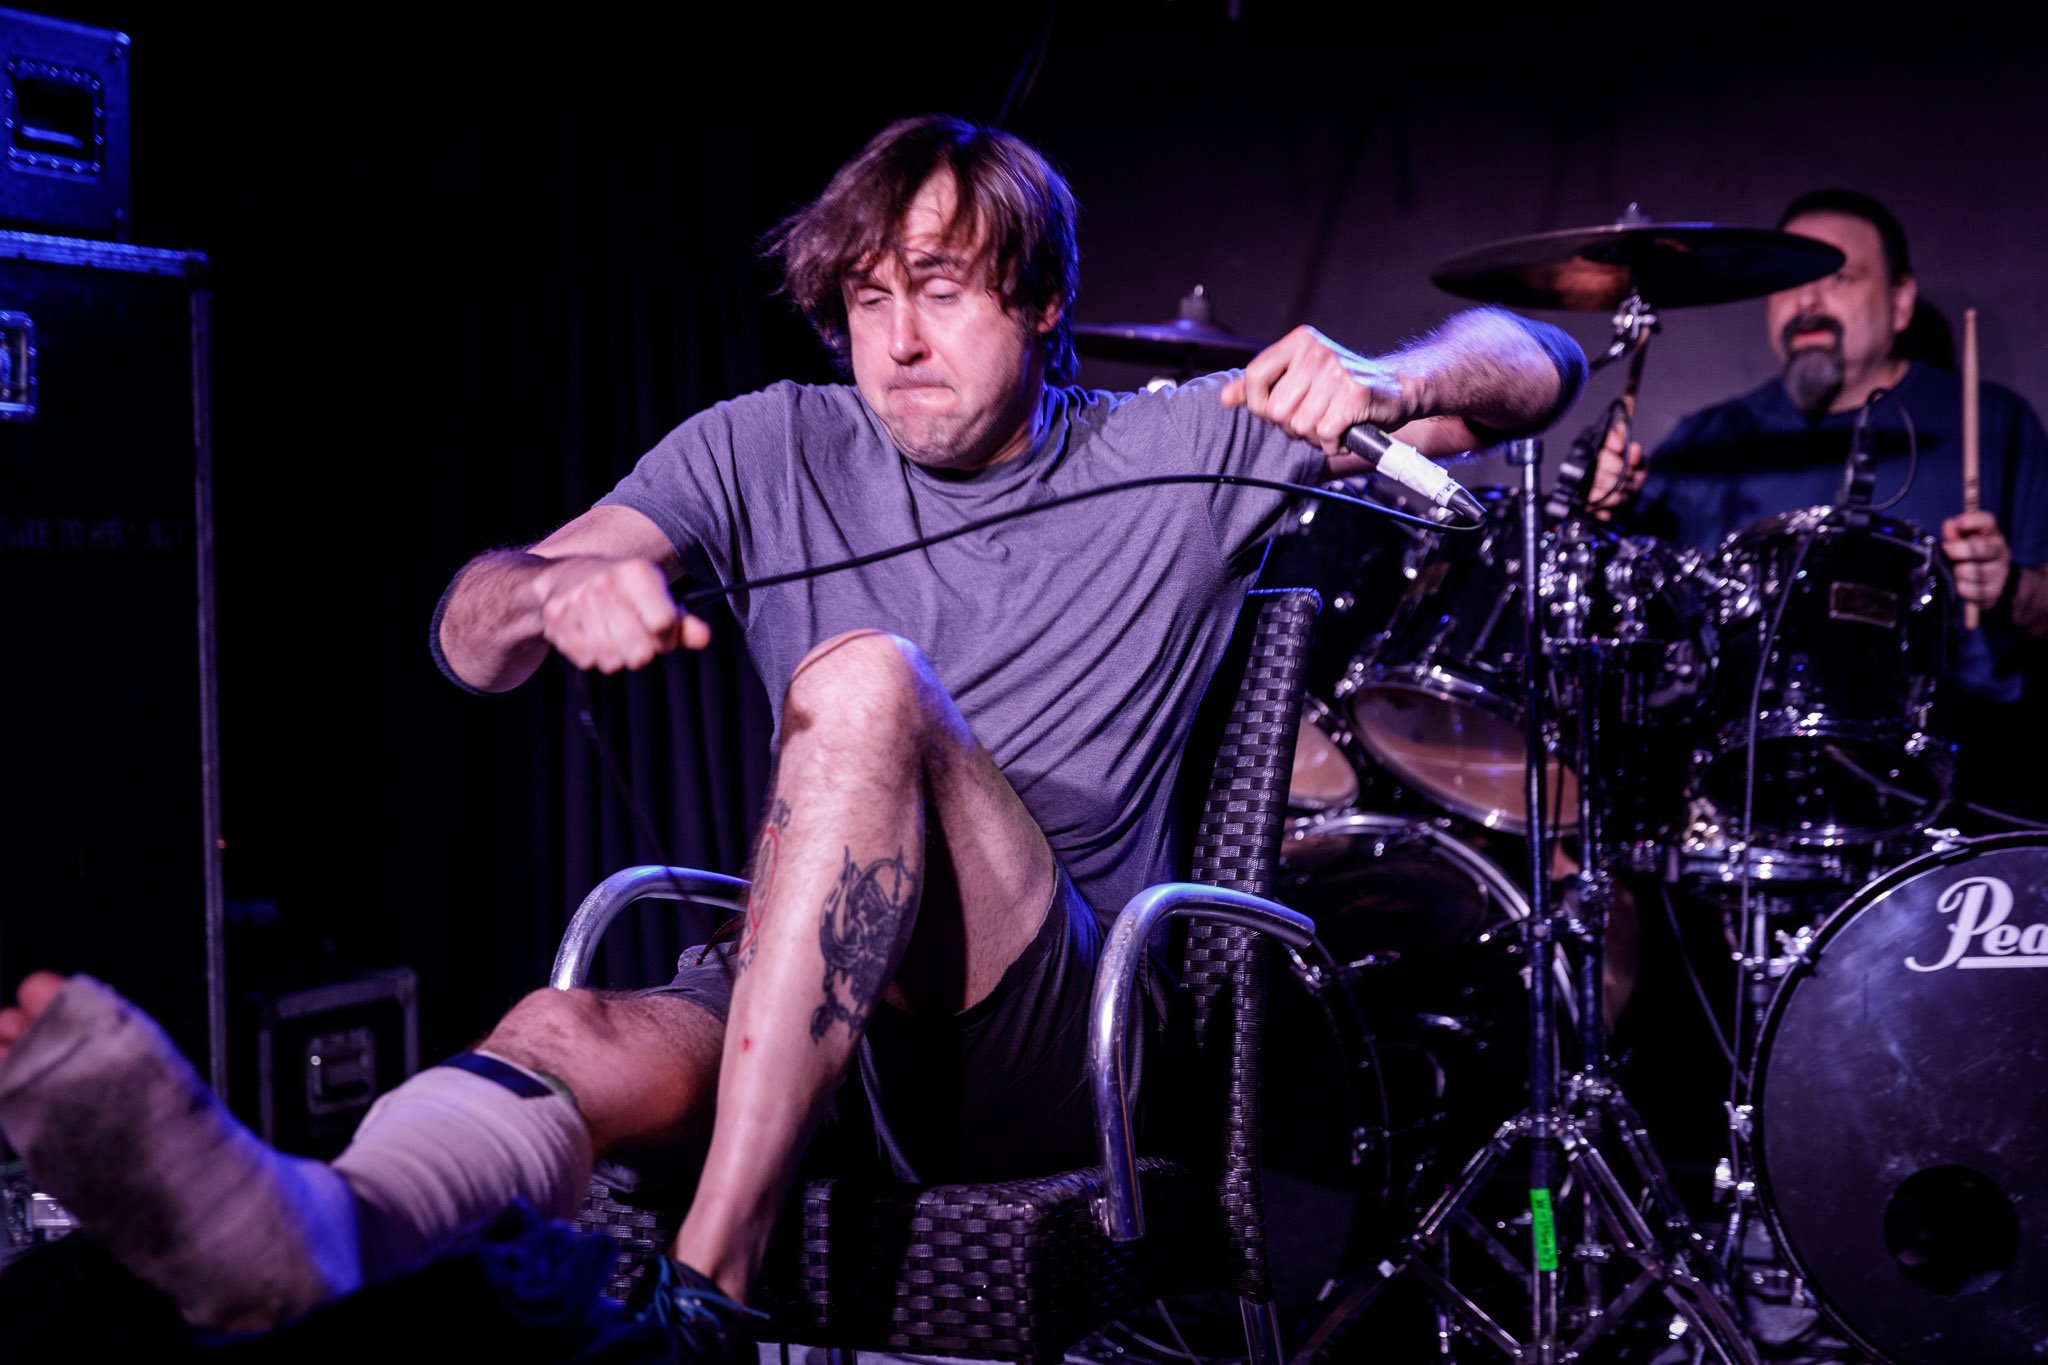 Napalm Death at the Club Academy in Manchester on March 8th 2023